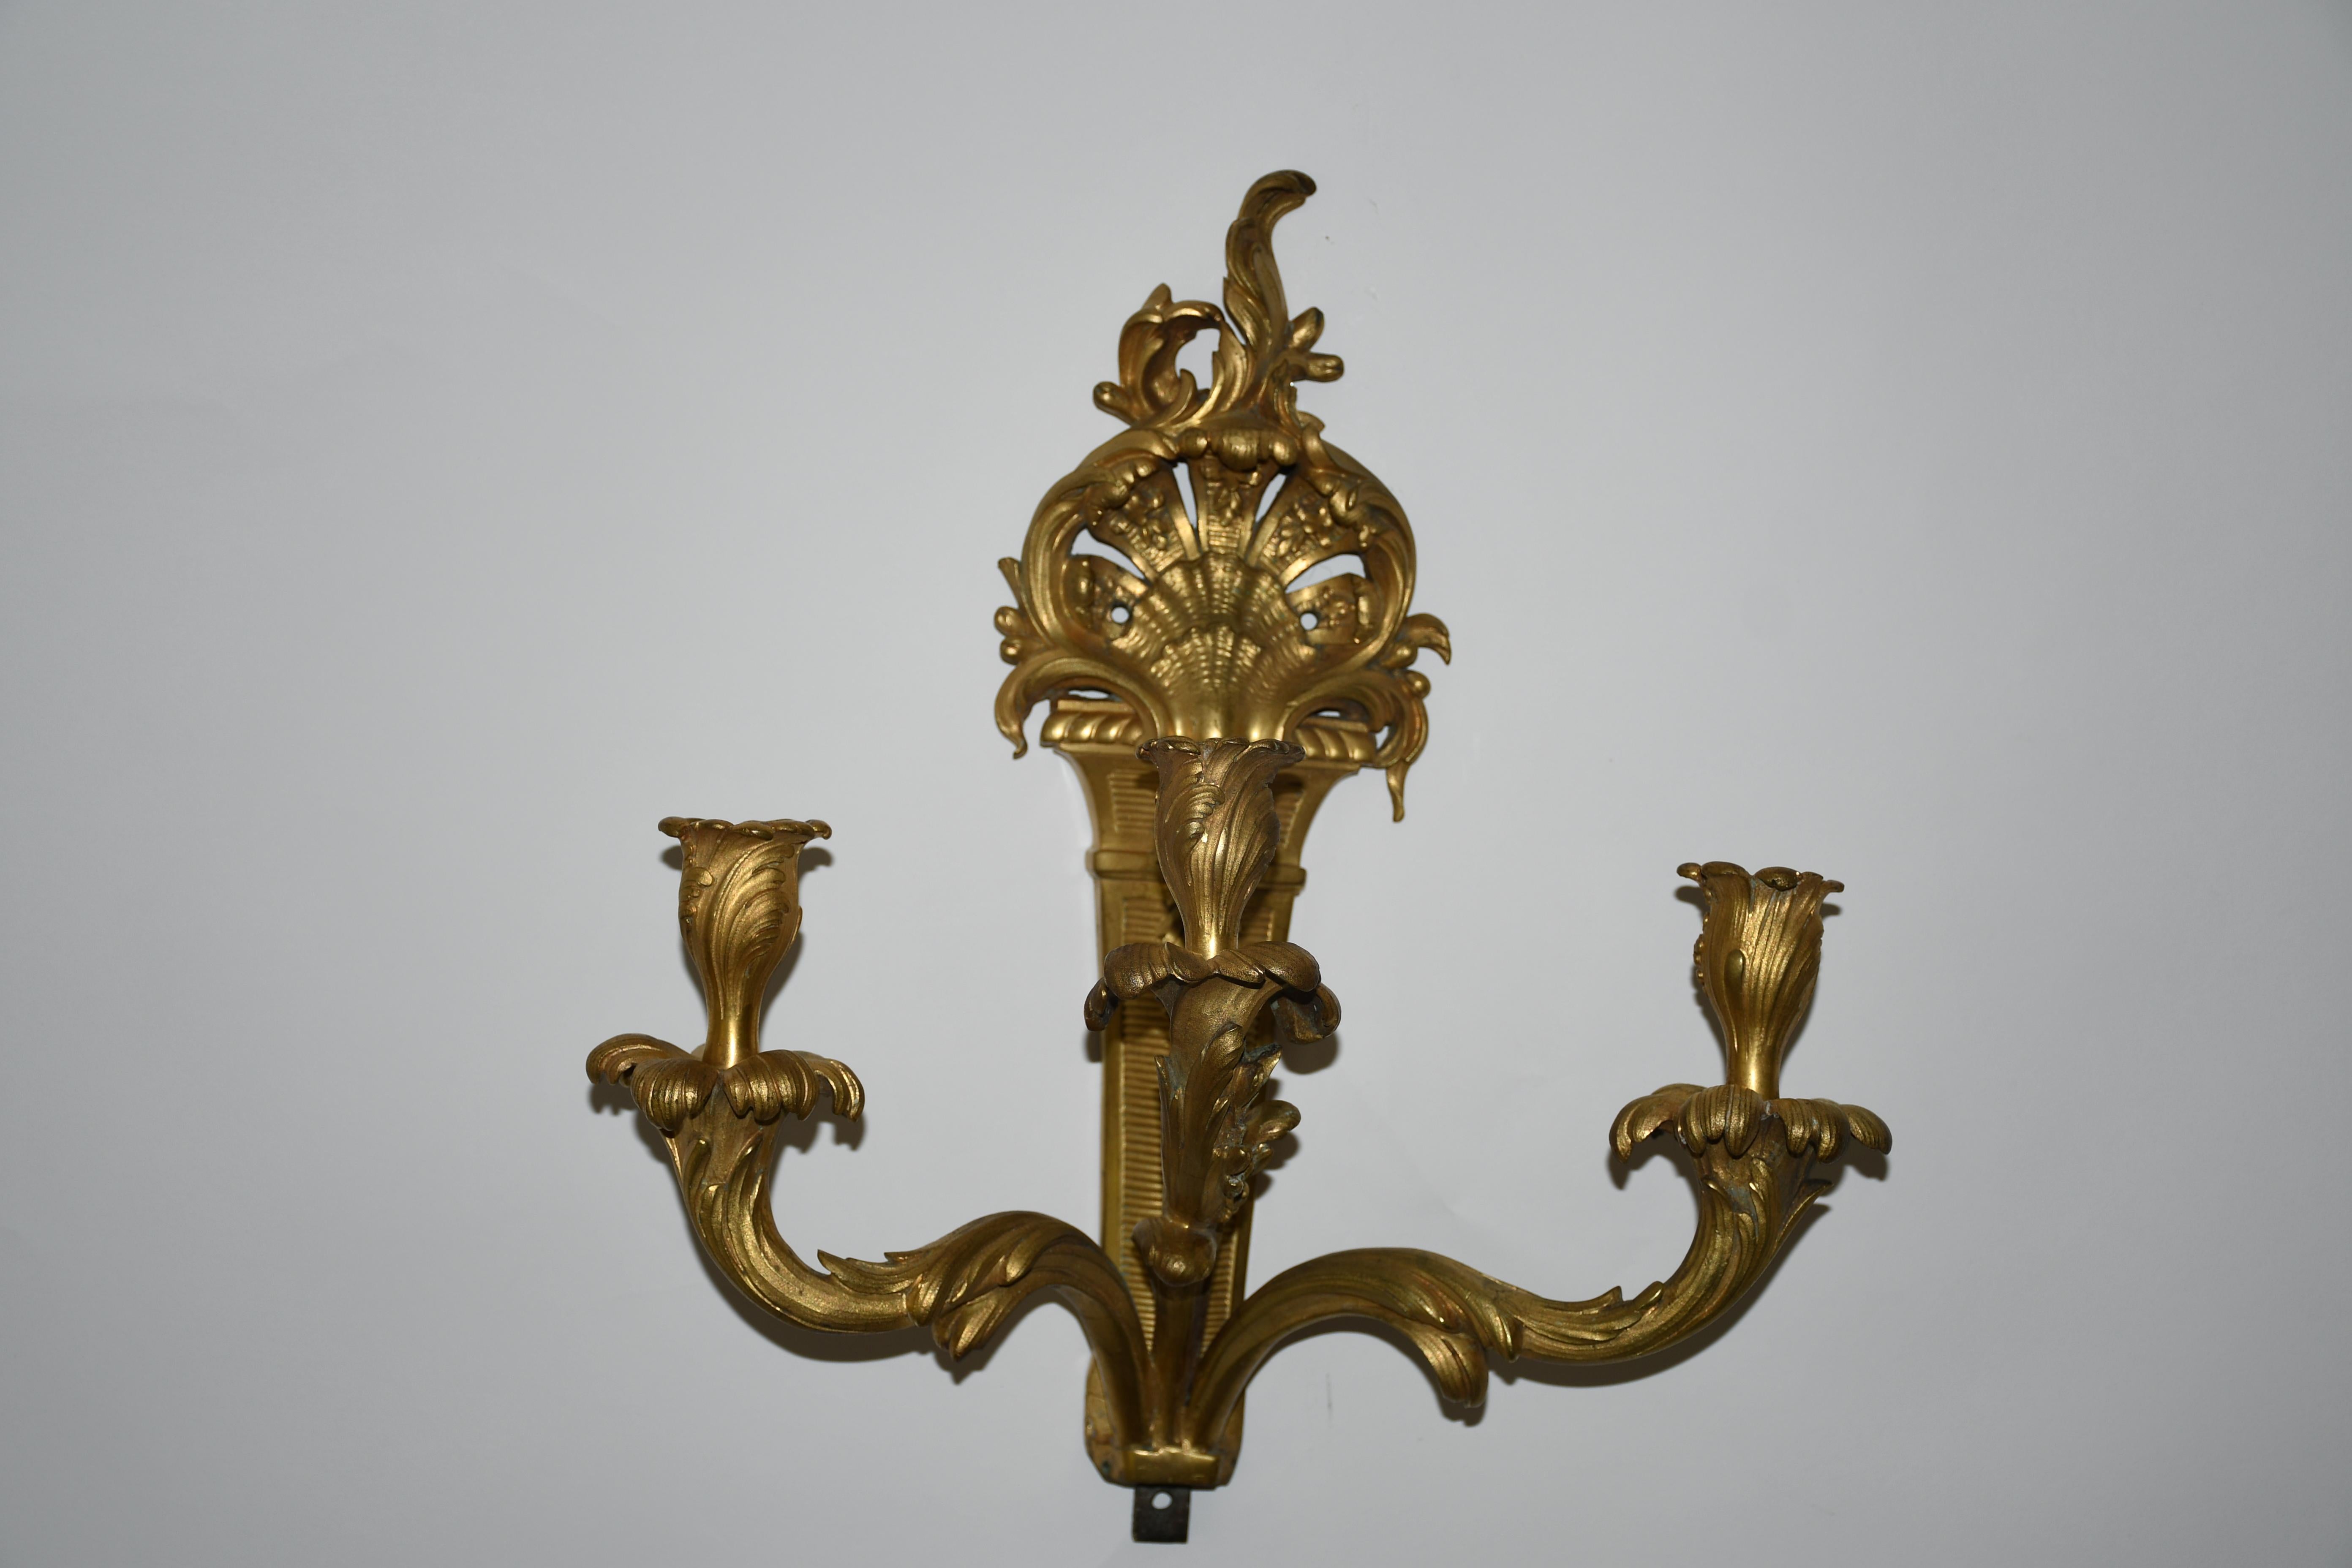 Mid 20th Century solid brass Louis XVI style sconce. Solid cast brass wall sconces with three arms in an orate manner.
Not currently wired.

